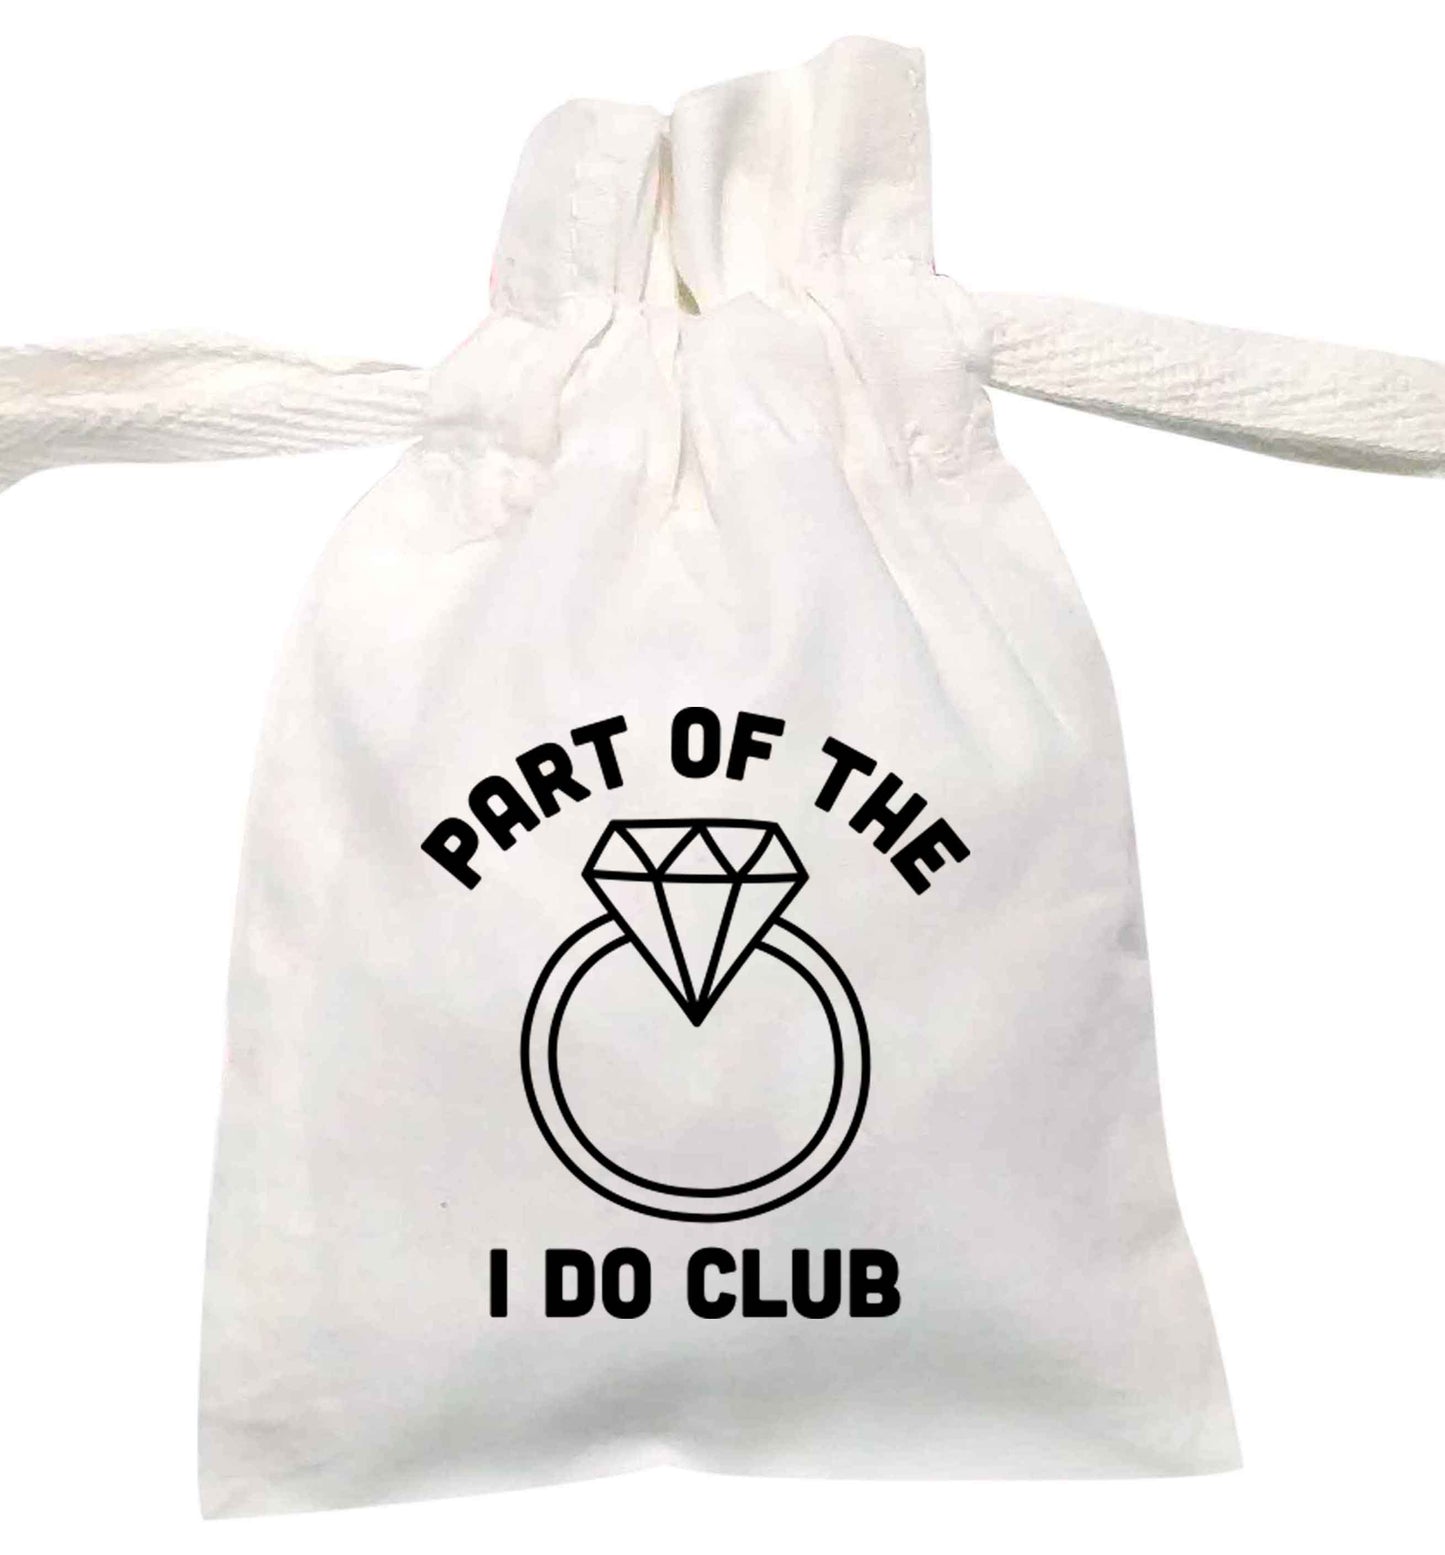 Part of the I do club | XS - L | Pouch / Drawstring bag / Sack | Organic Cotton | Bulk discounts available!